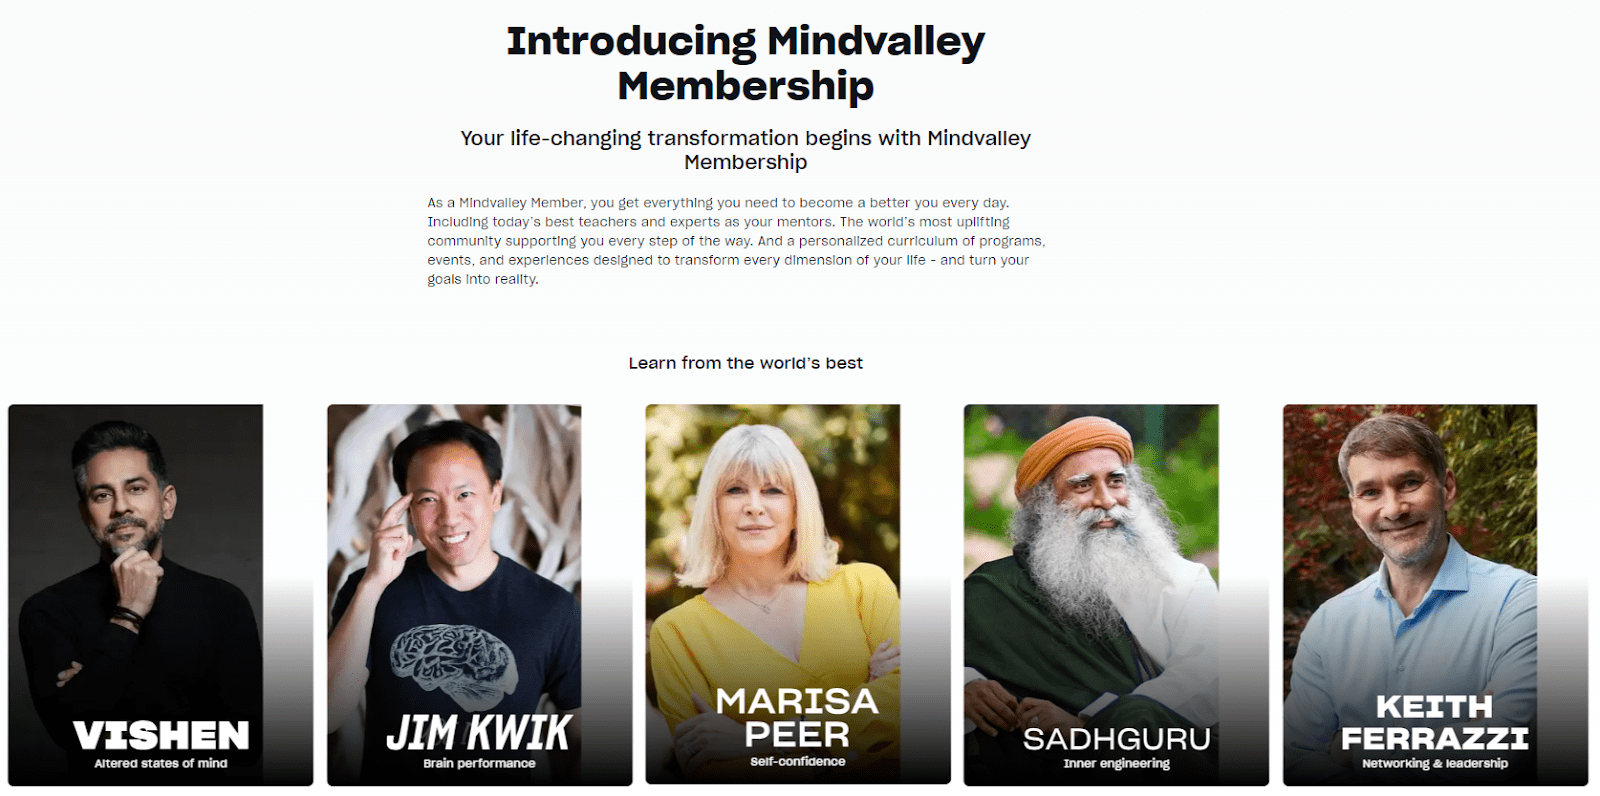 Overview of Mindvalley Membership 